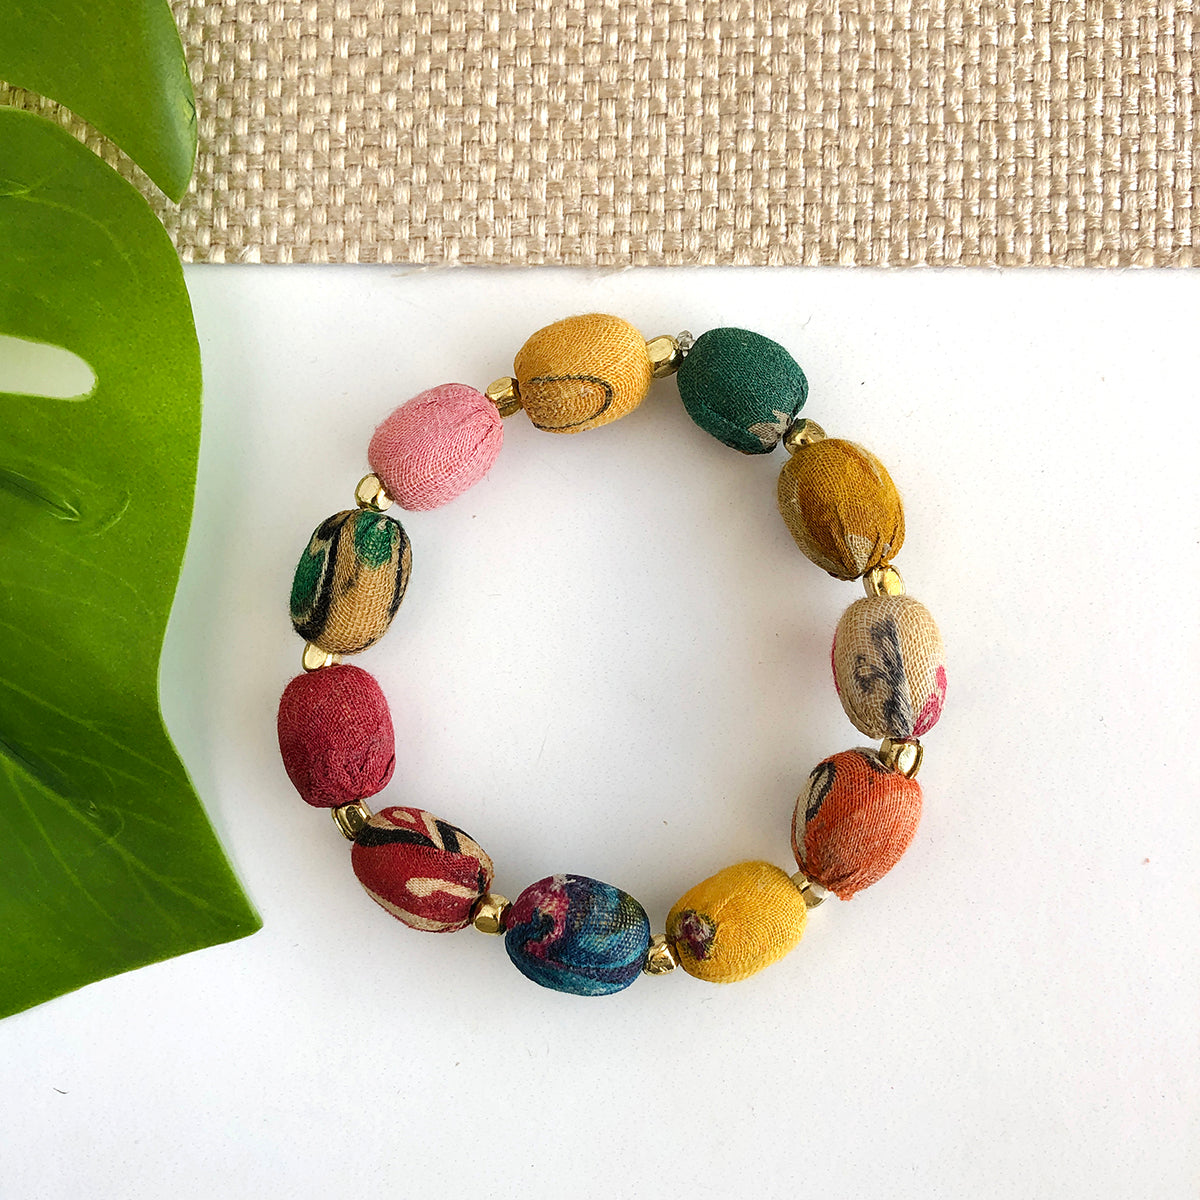 Buy The Red Polymer Clay and Silver Beaded Bracelet | JaeBee Jewelry 6 - 7